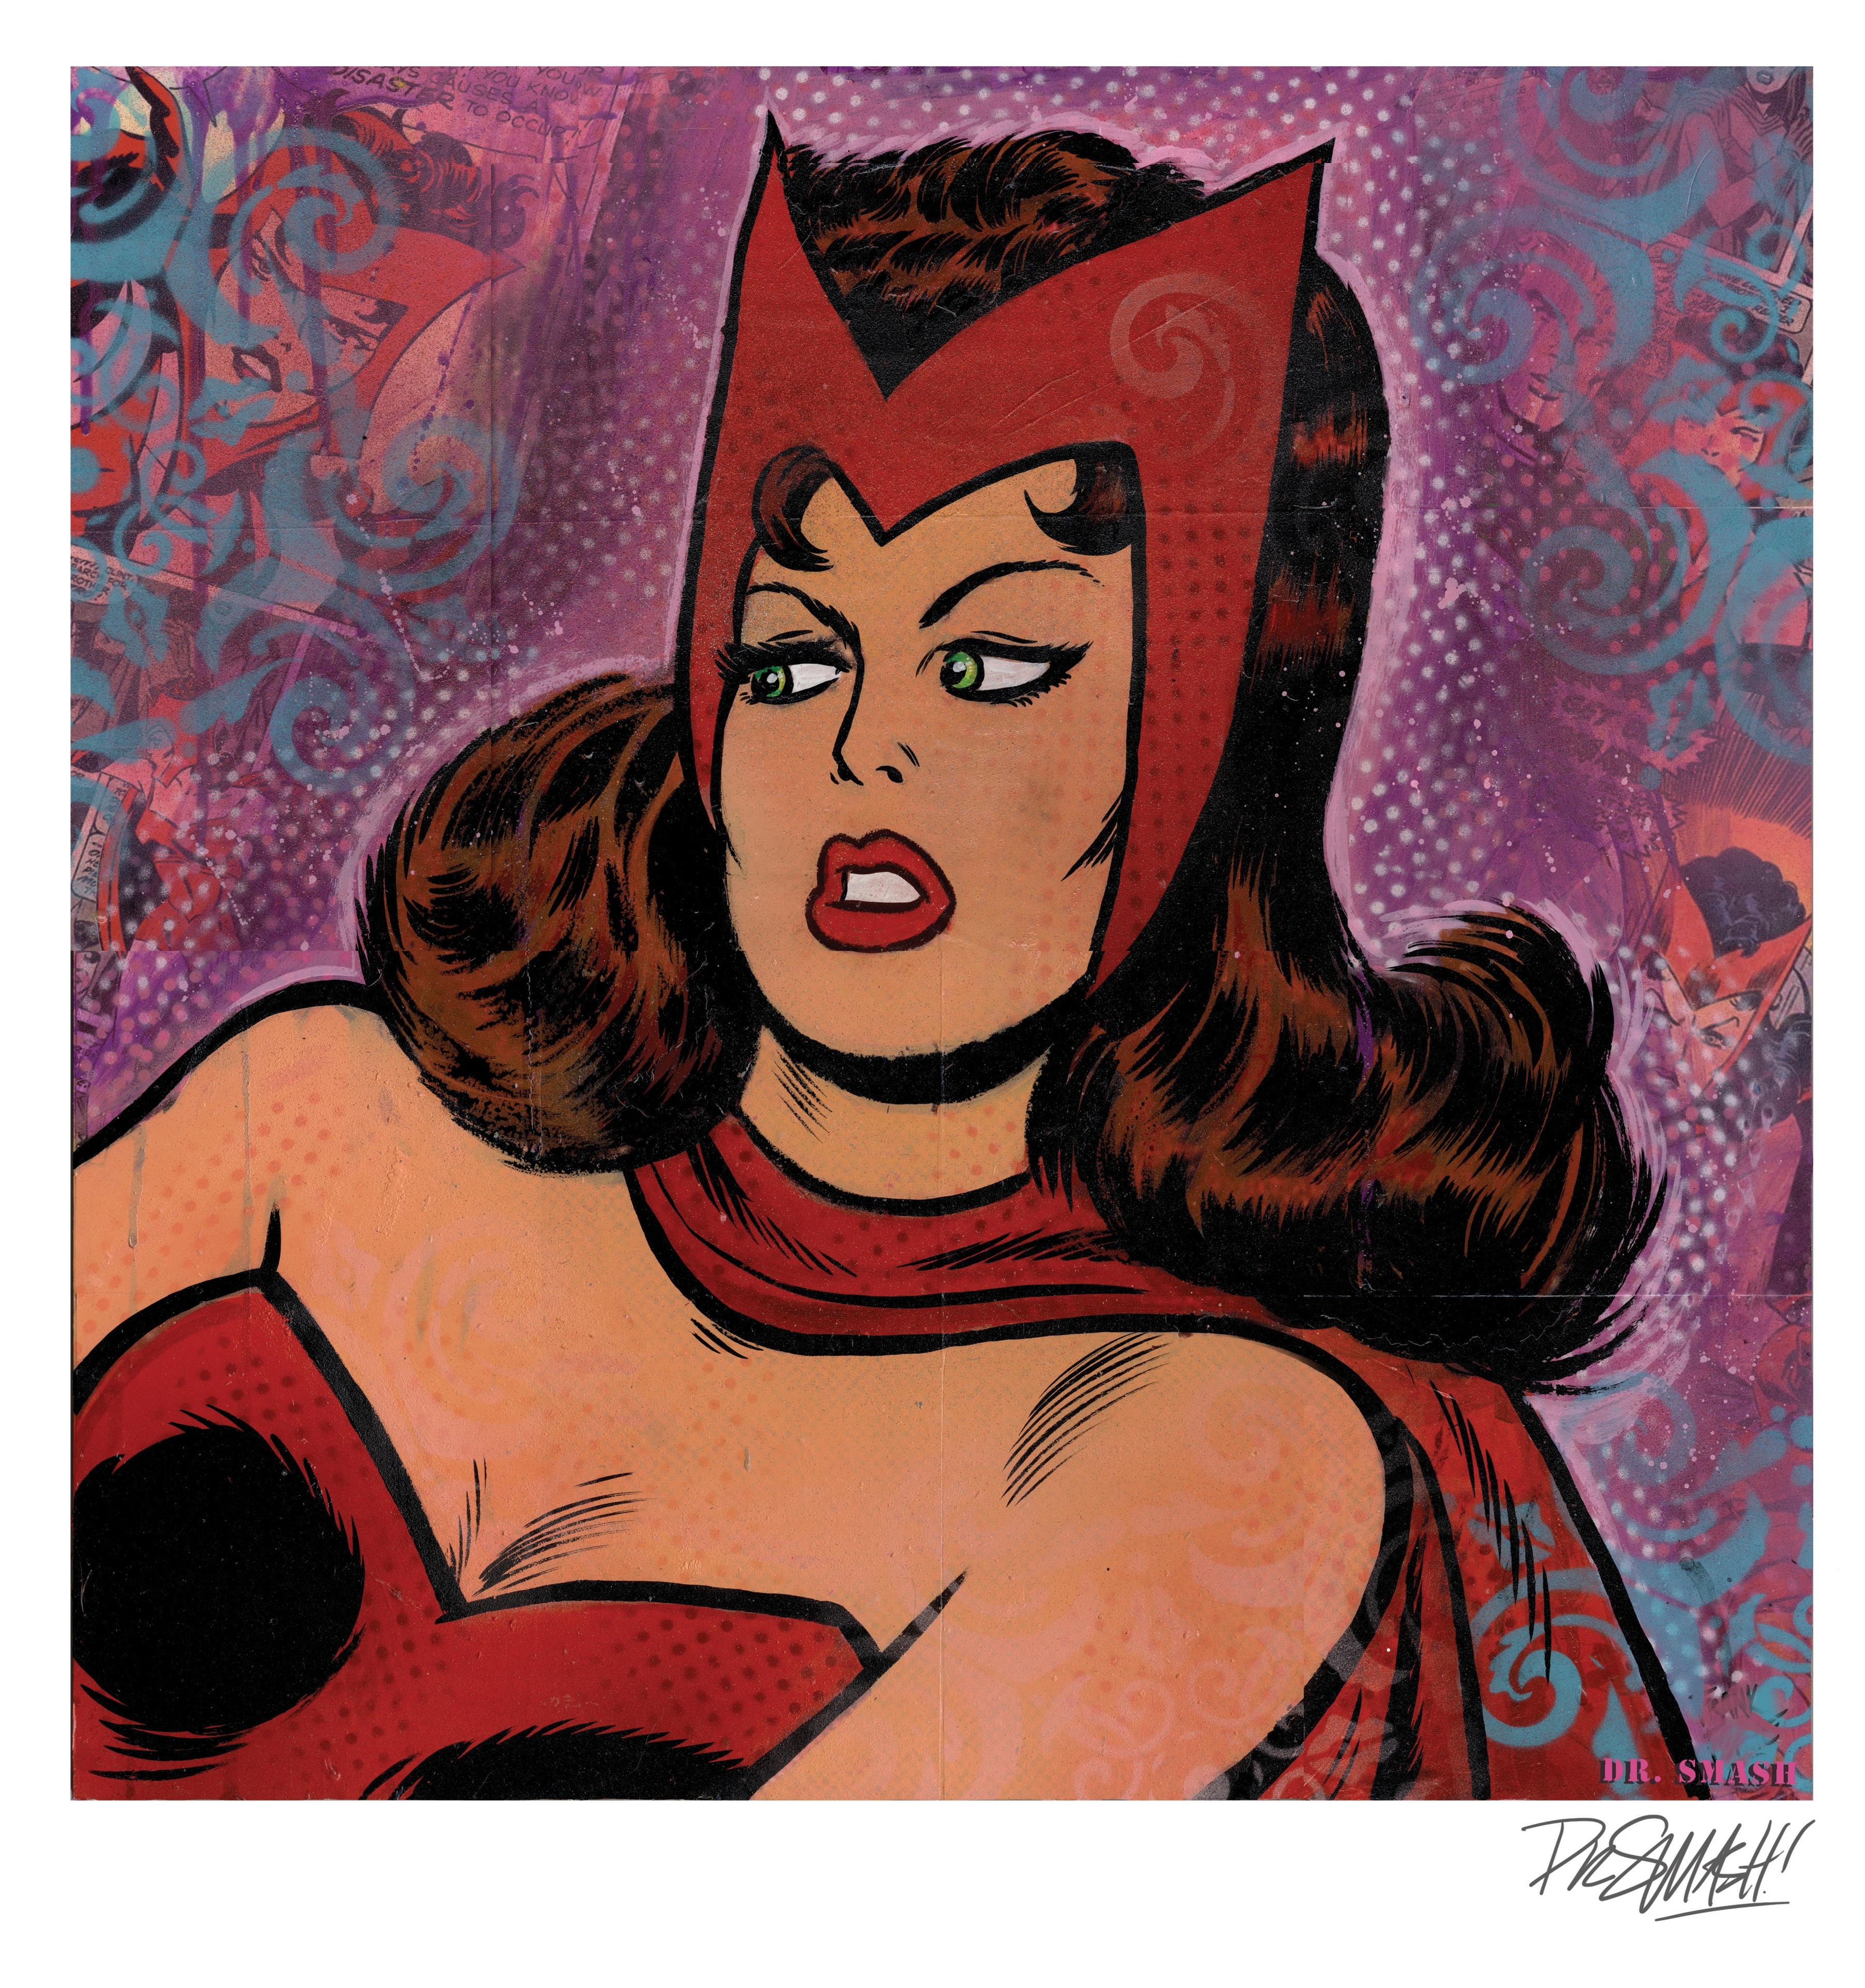 "Scarlet Witch" by Dr. Smash! 12x12 signed Print